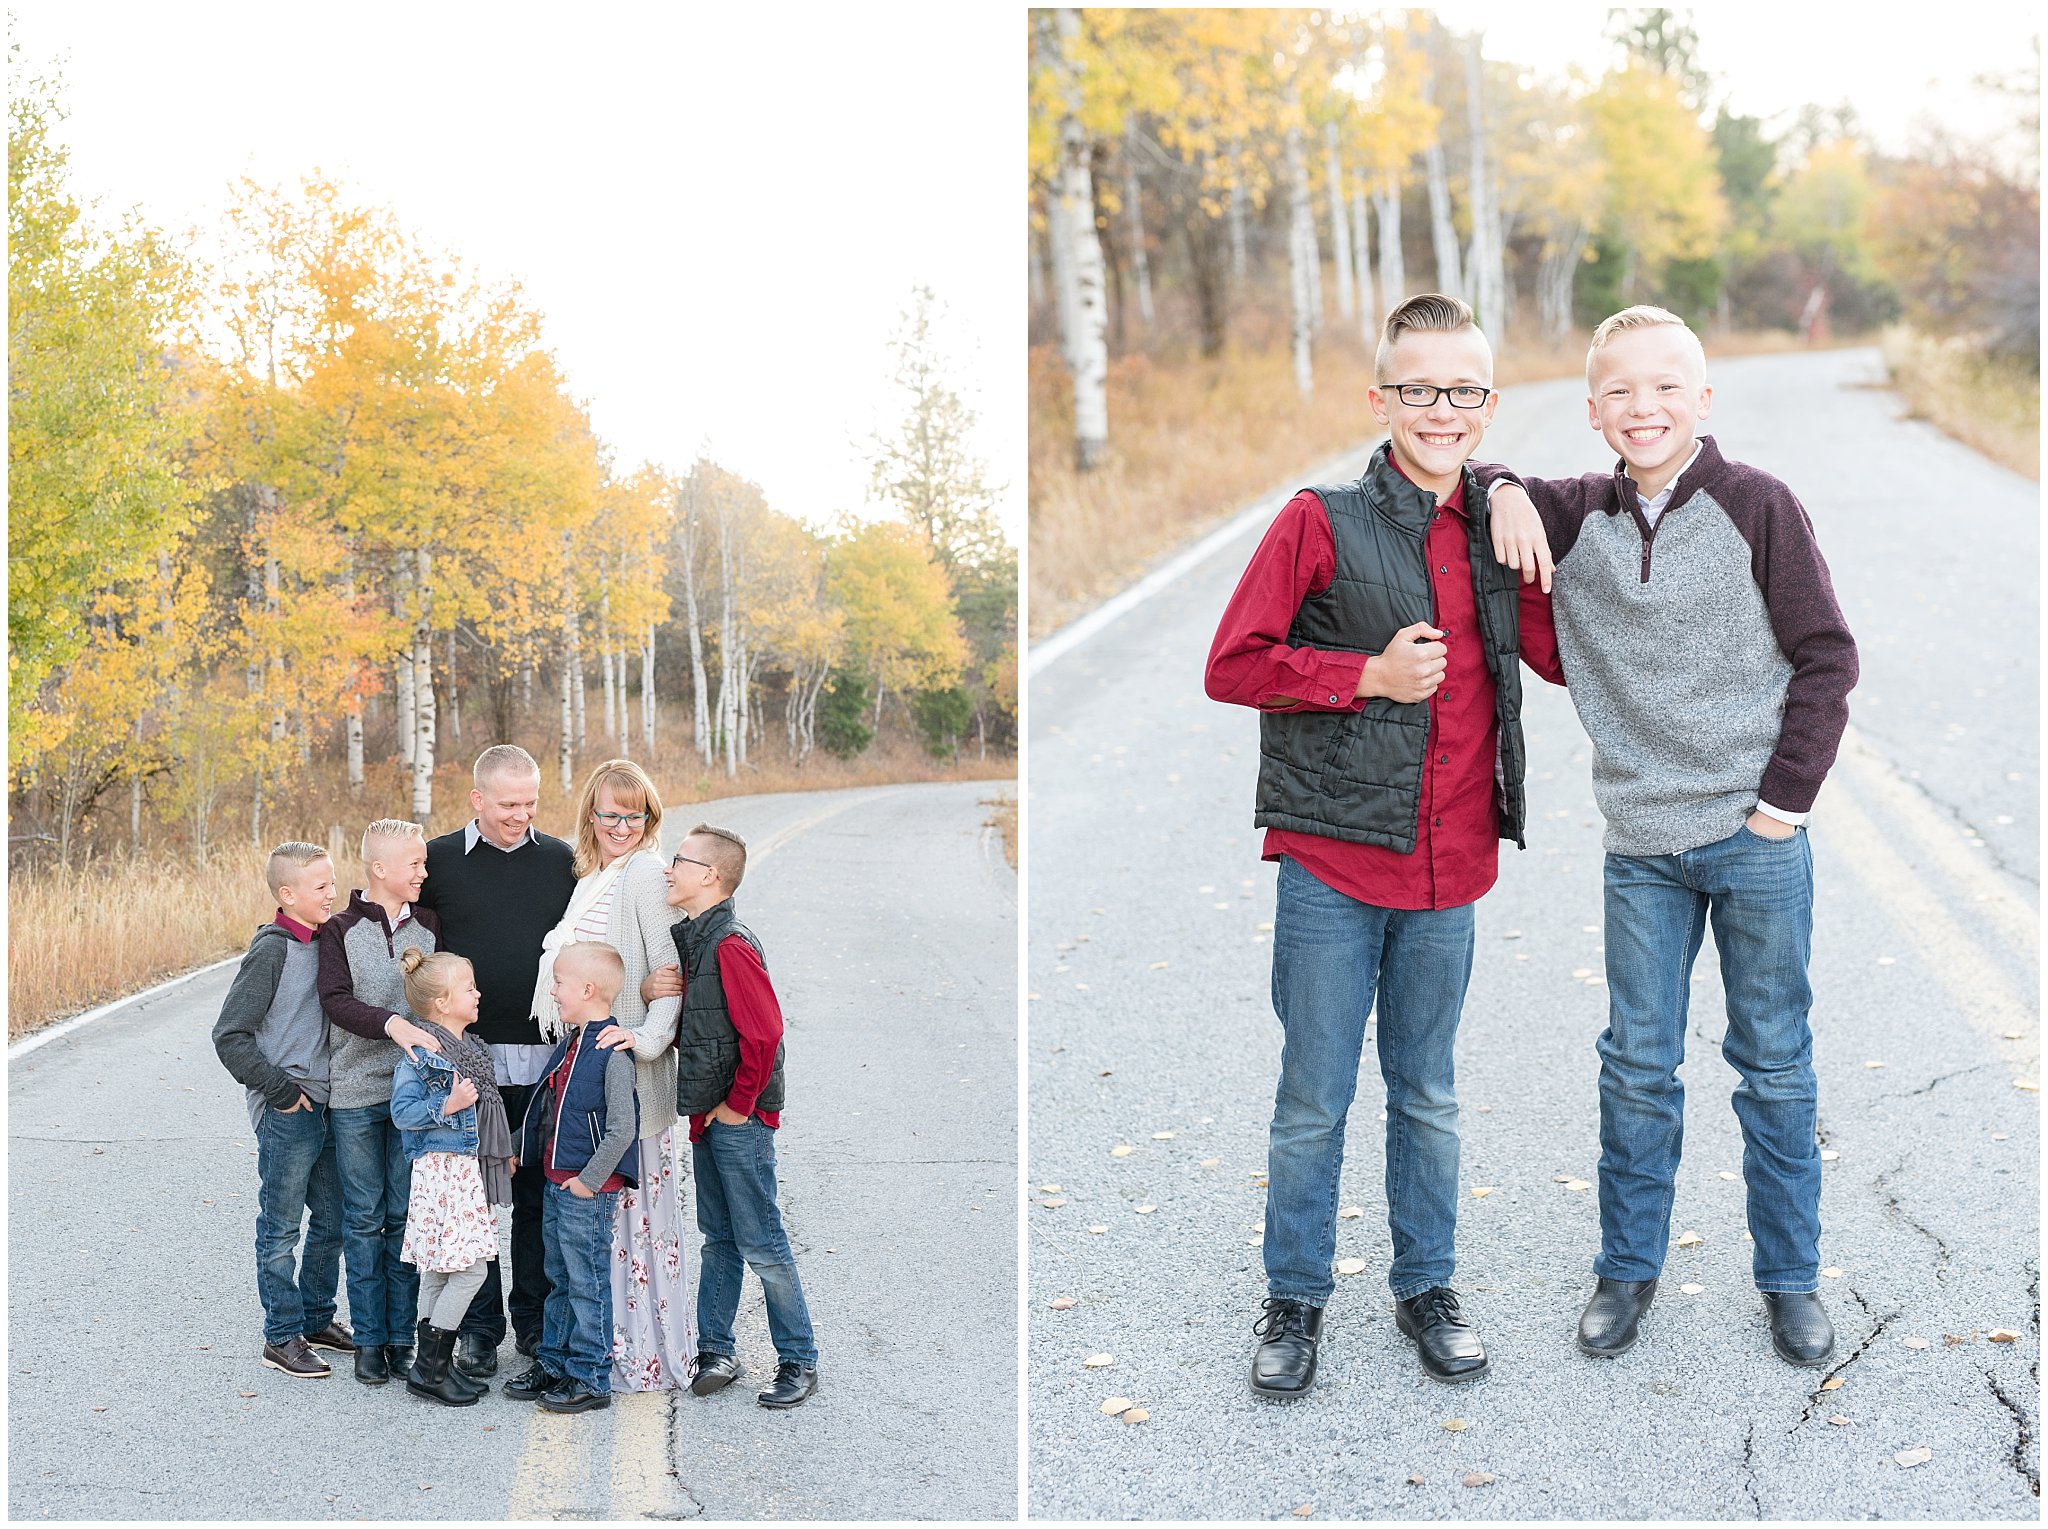 Twin brothers and family in the fall aspen trees | Fall Family Pictures in the Mountains | Snowbasin, Utah | Jessie and Dallin Photography